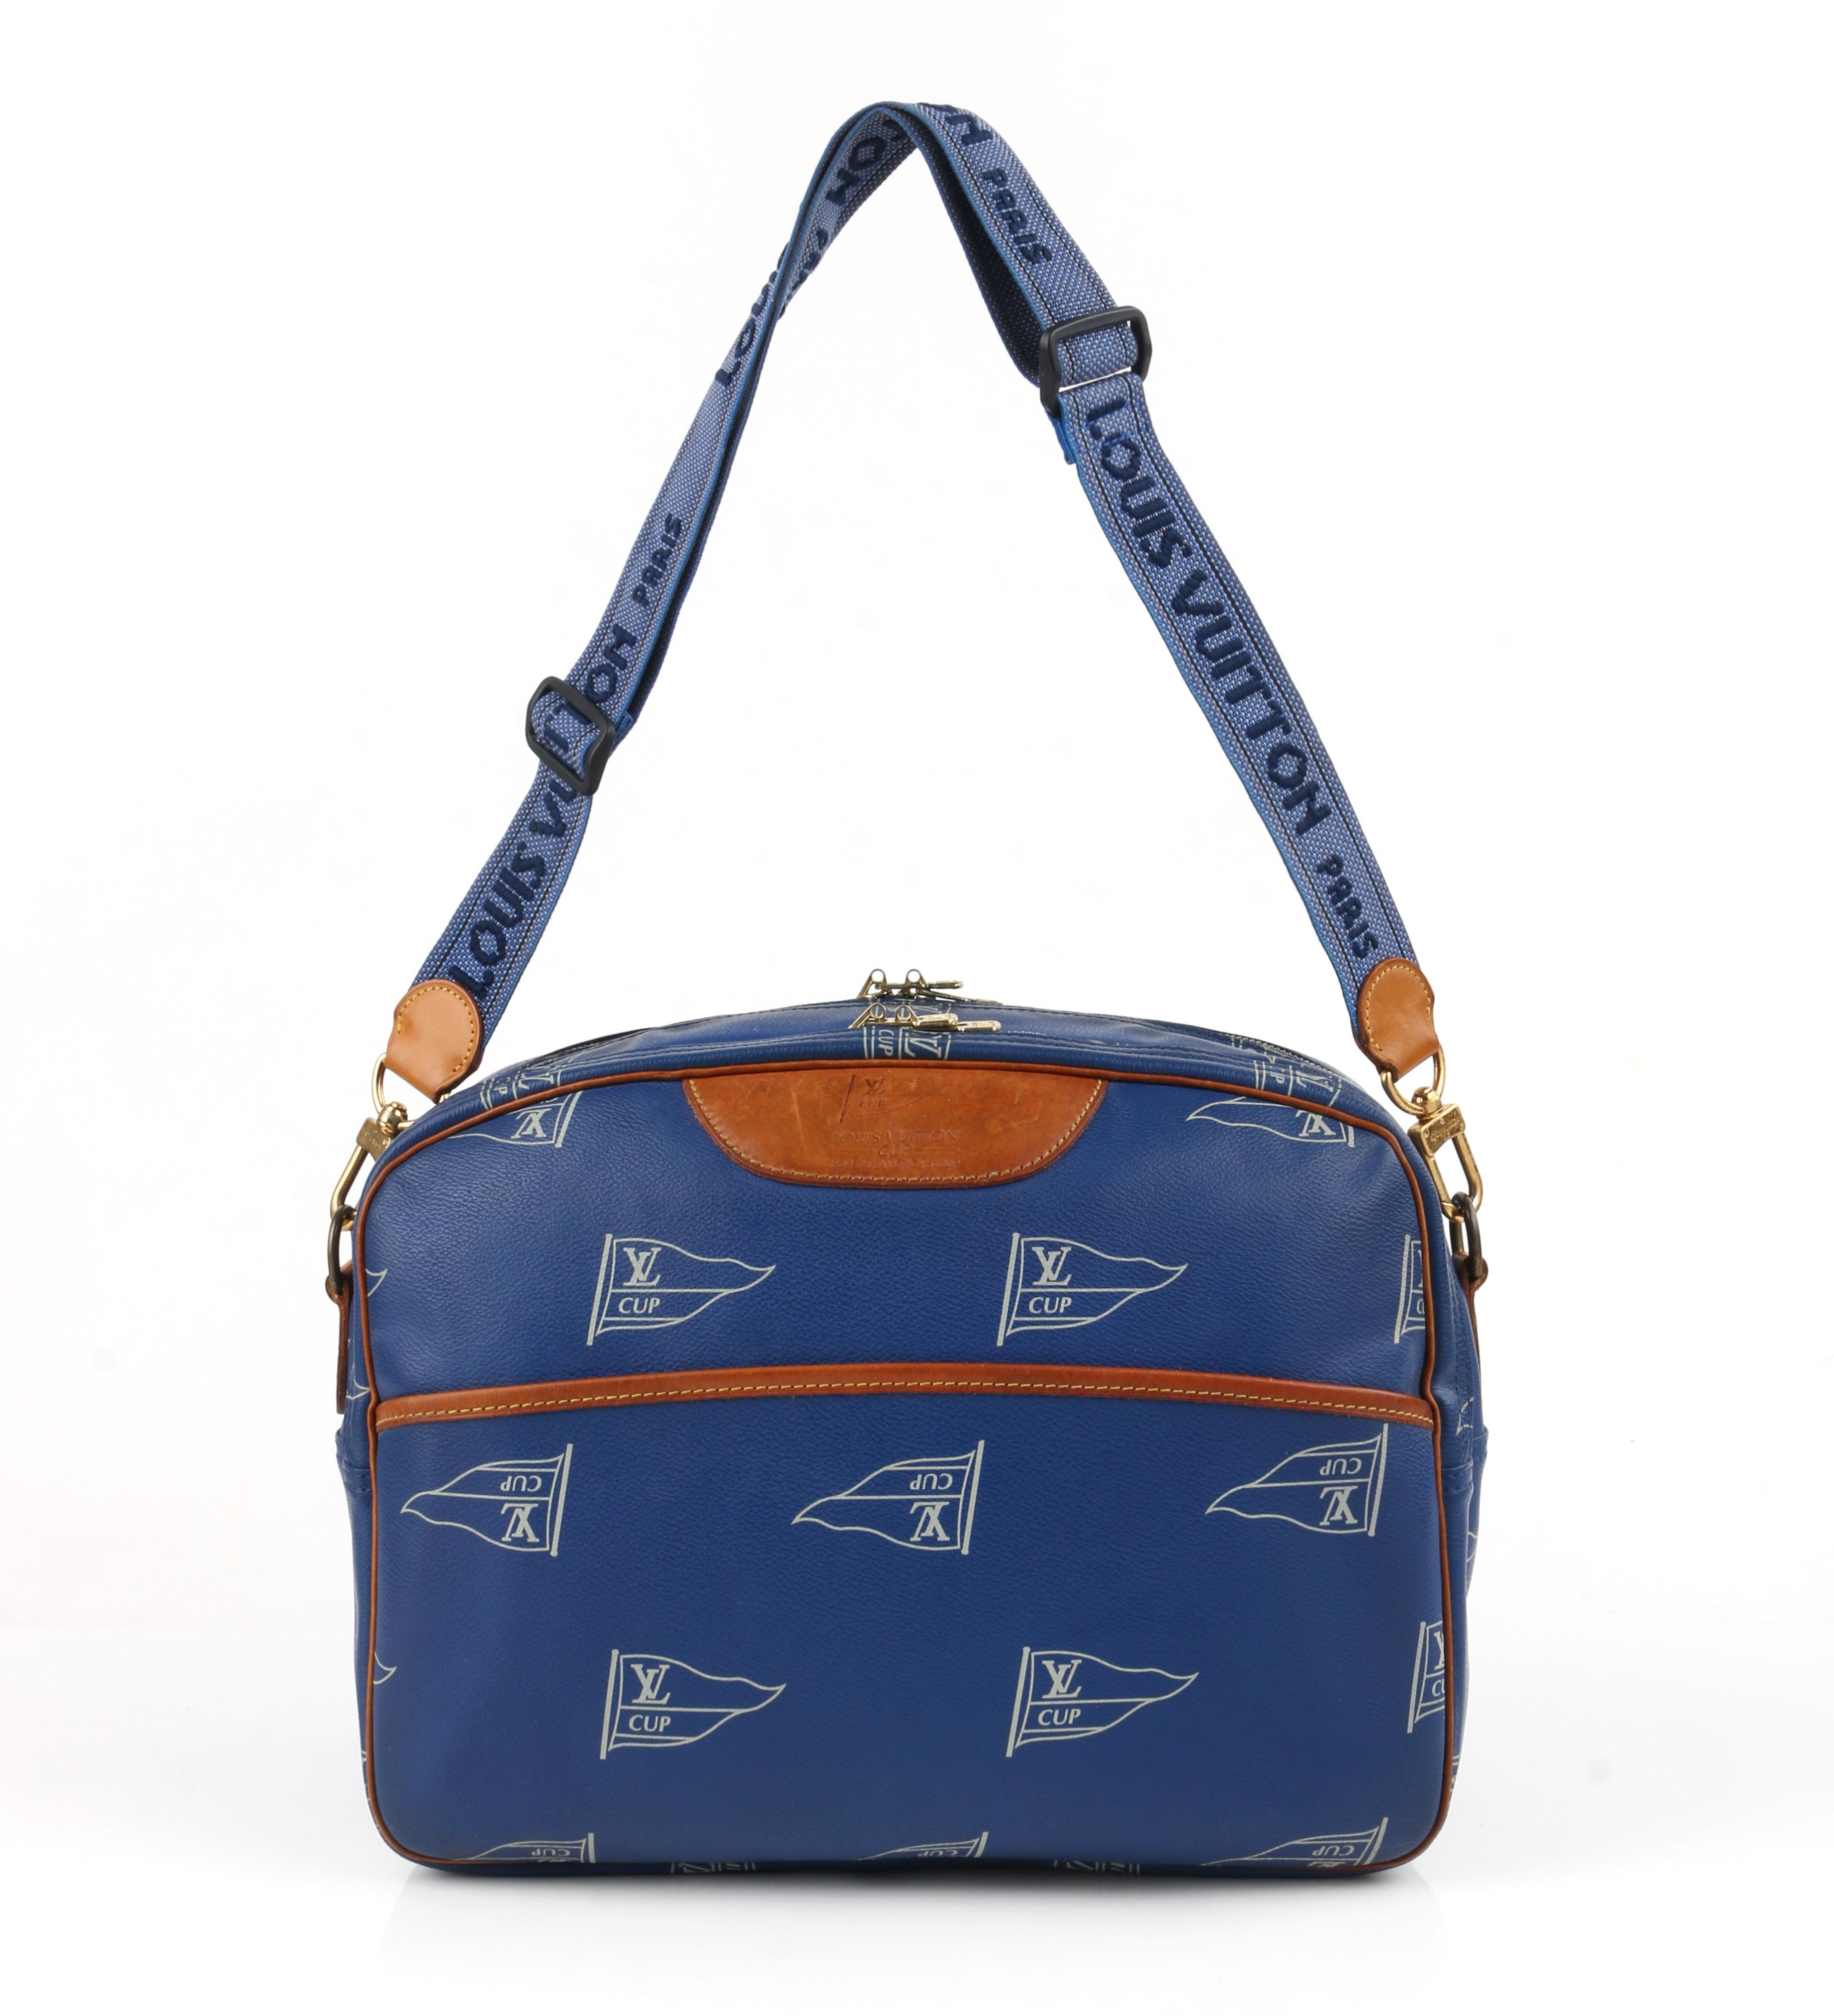 LOUIS VUITTON c.1992 LV America’s Cup Sailing Messenger Shoulder Bag LTD ED
 
Circa: c.1992
Labels: Louis Vuitton
Style: Messenger bag, shoulder bag
Color(s): Shades of blue, white and tan
Lined: No
Unmarked Fabric Content: Coated canvas;